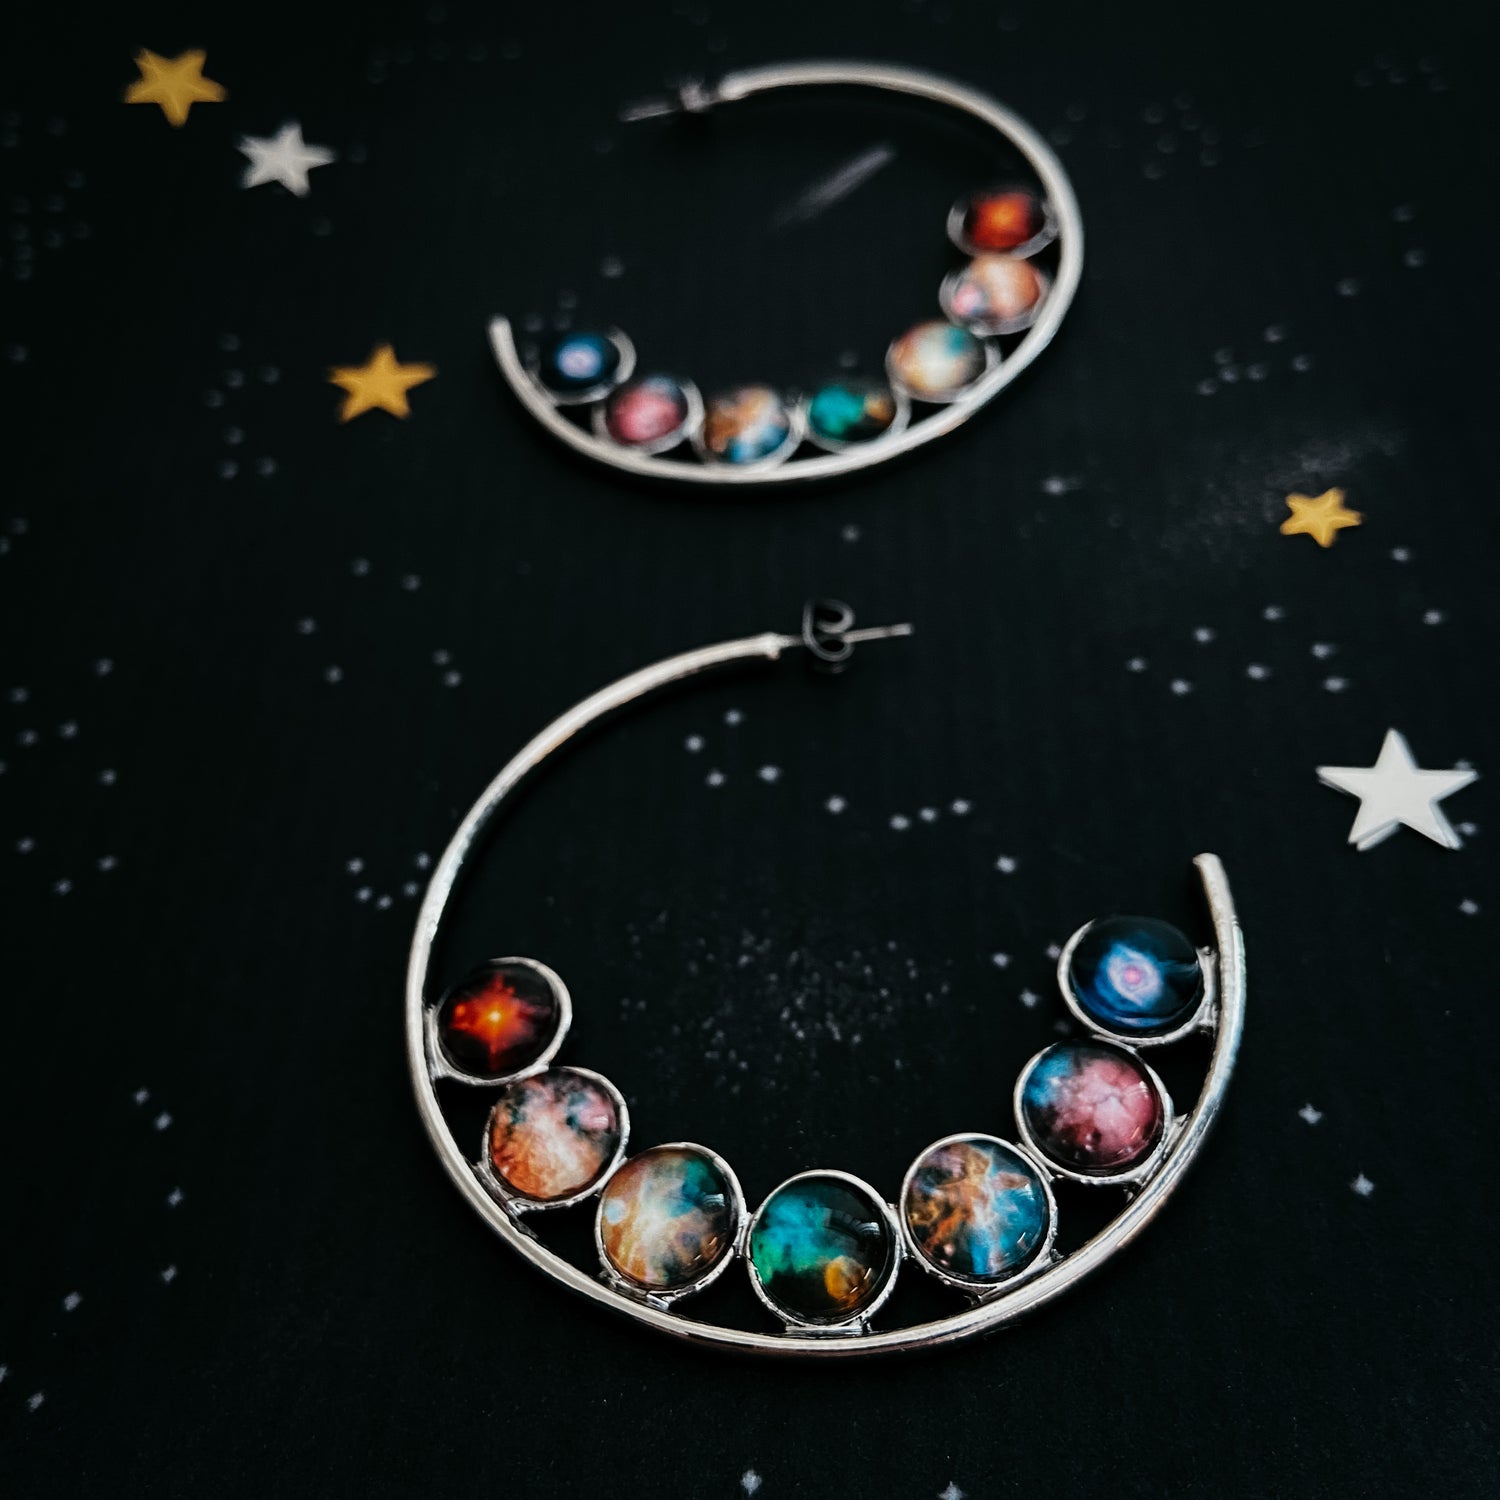 Silver hoop earrings with ROYGBIV images of nebula set in glass. Earrings are laid against a black background with stars. Available at yugenhandmade.com